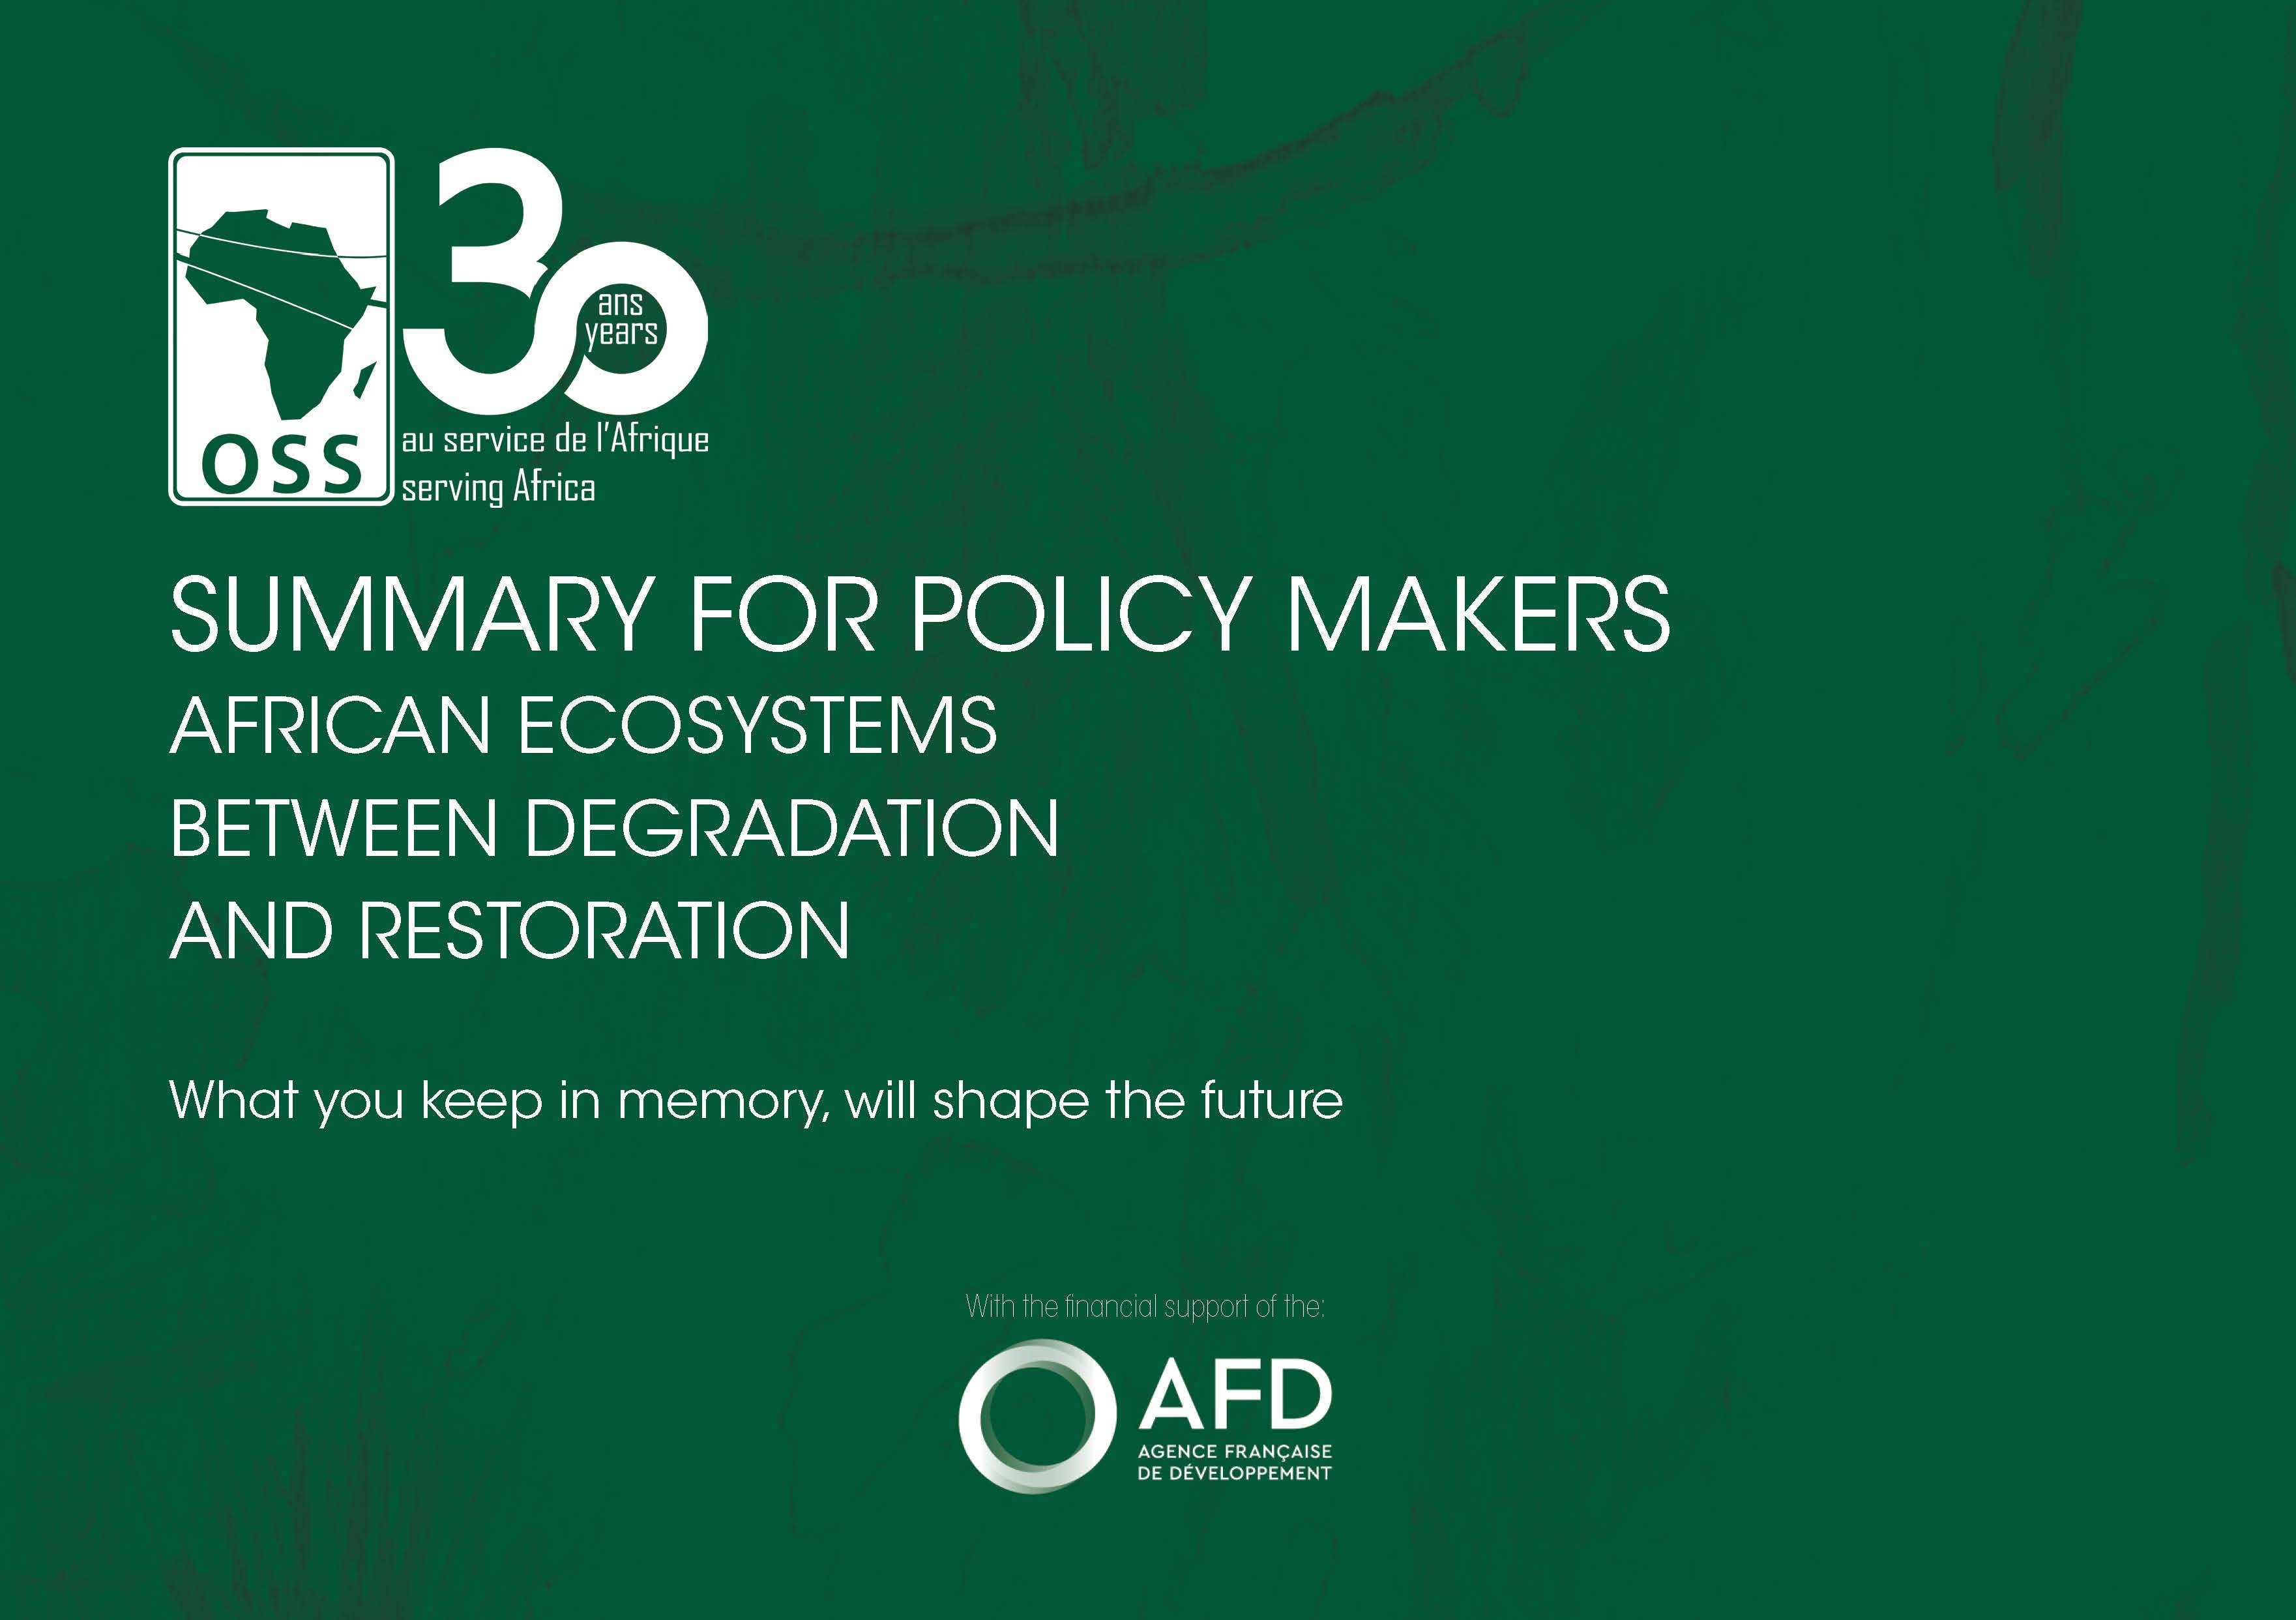 Summary for policy makers african ecosystems between degradation and restoration - What you keep in memory, will shape the future